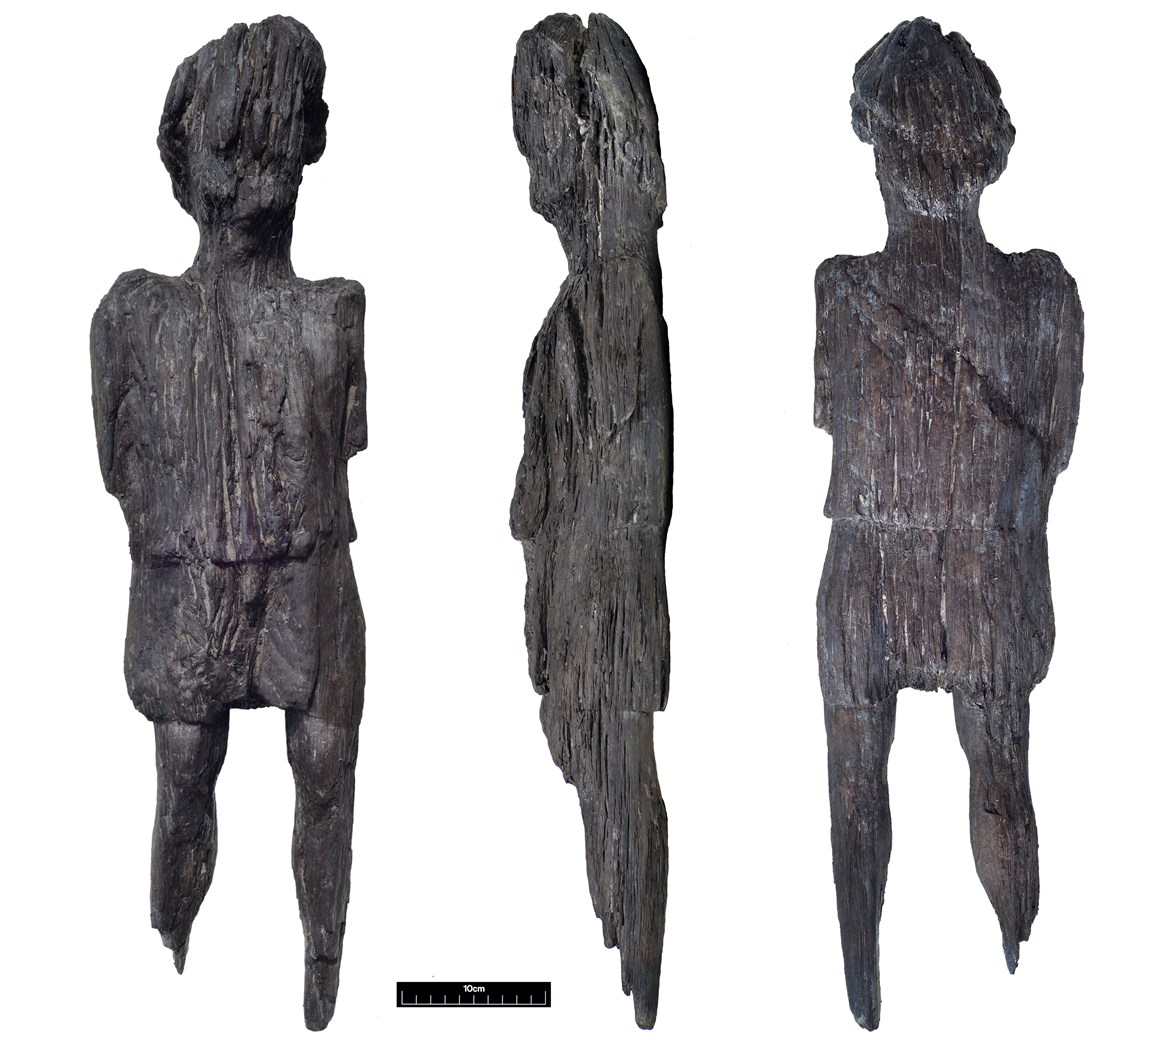 Rare Roman wooden figure uncovered by HS2 archaeologists in Buckinghamshire: Roman Carved Wooden Figure uncovered by HS2 archaeologists in Buckinghamshire-2